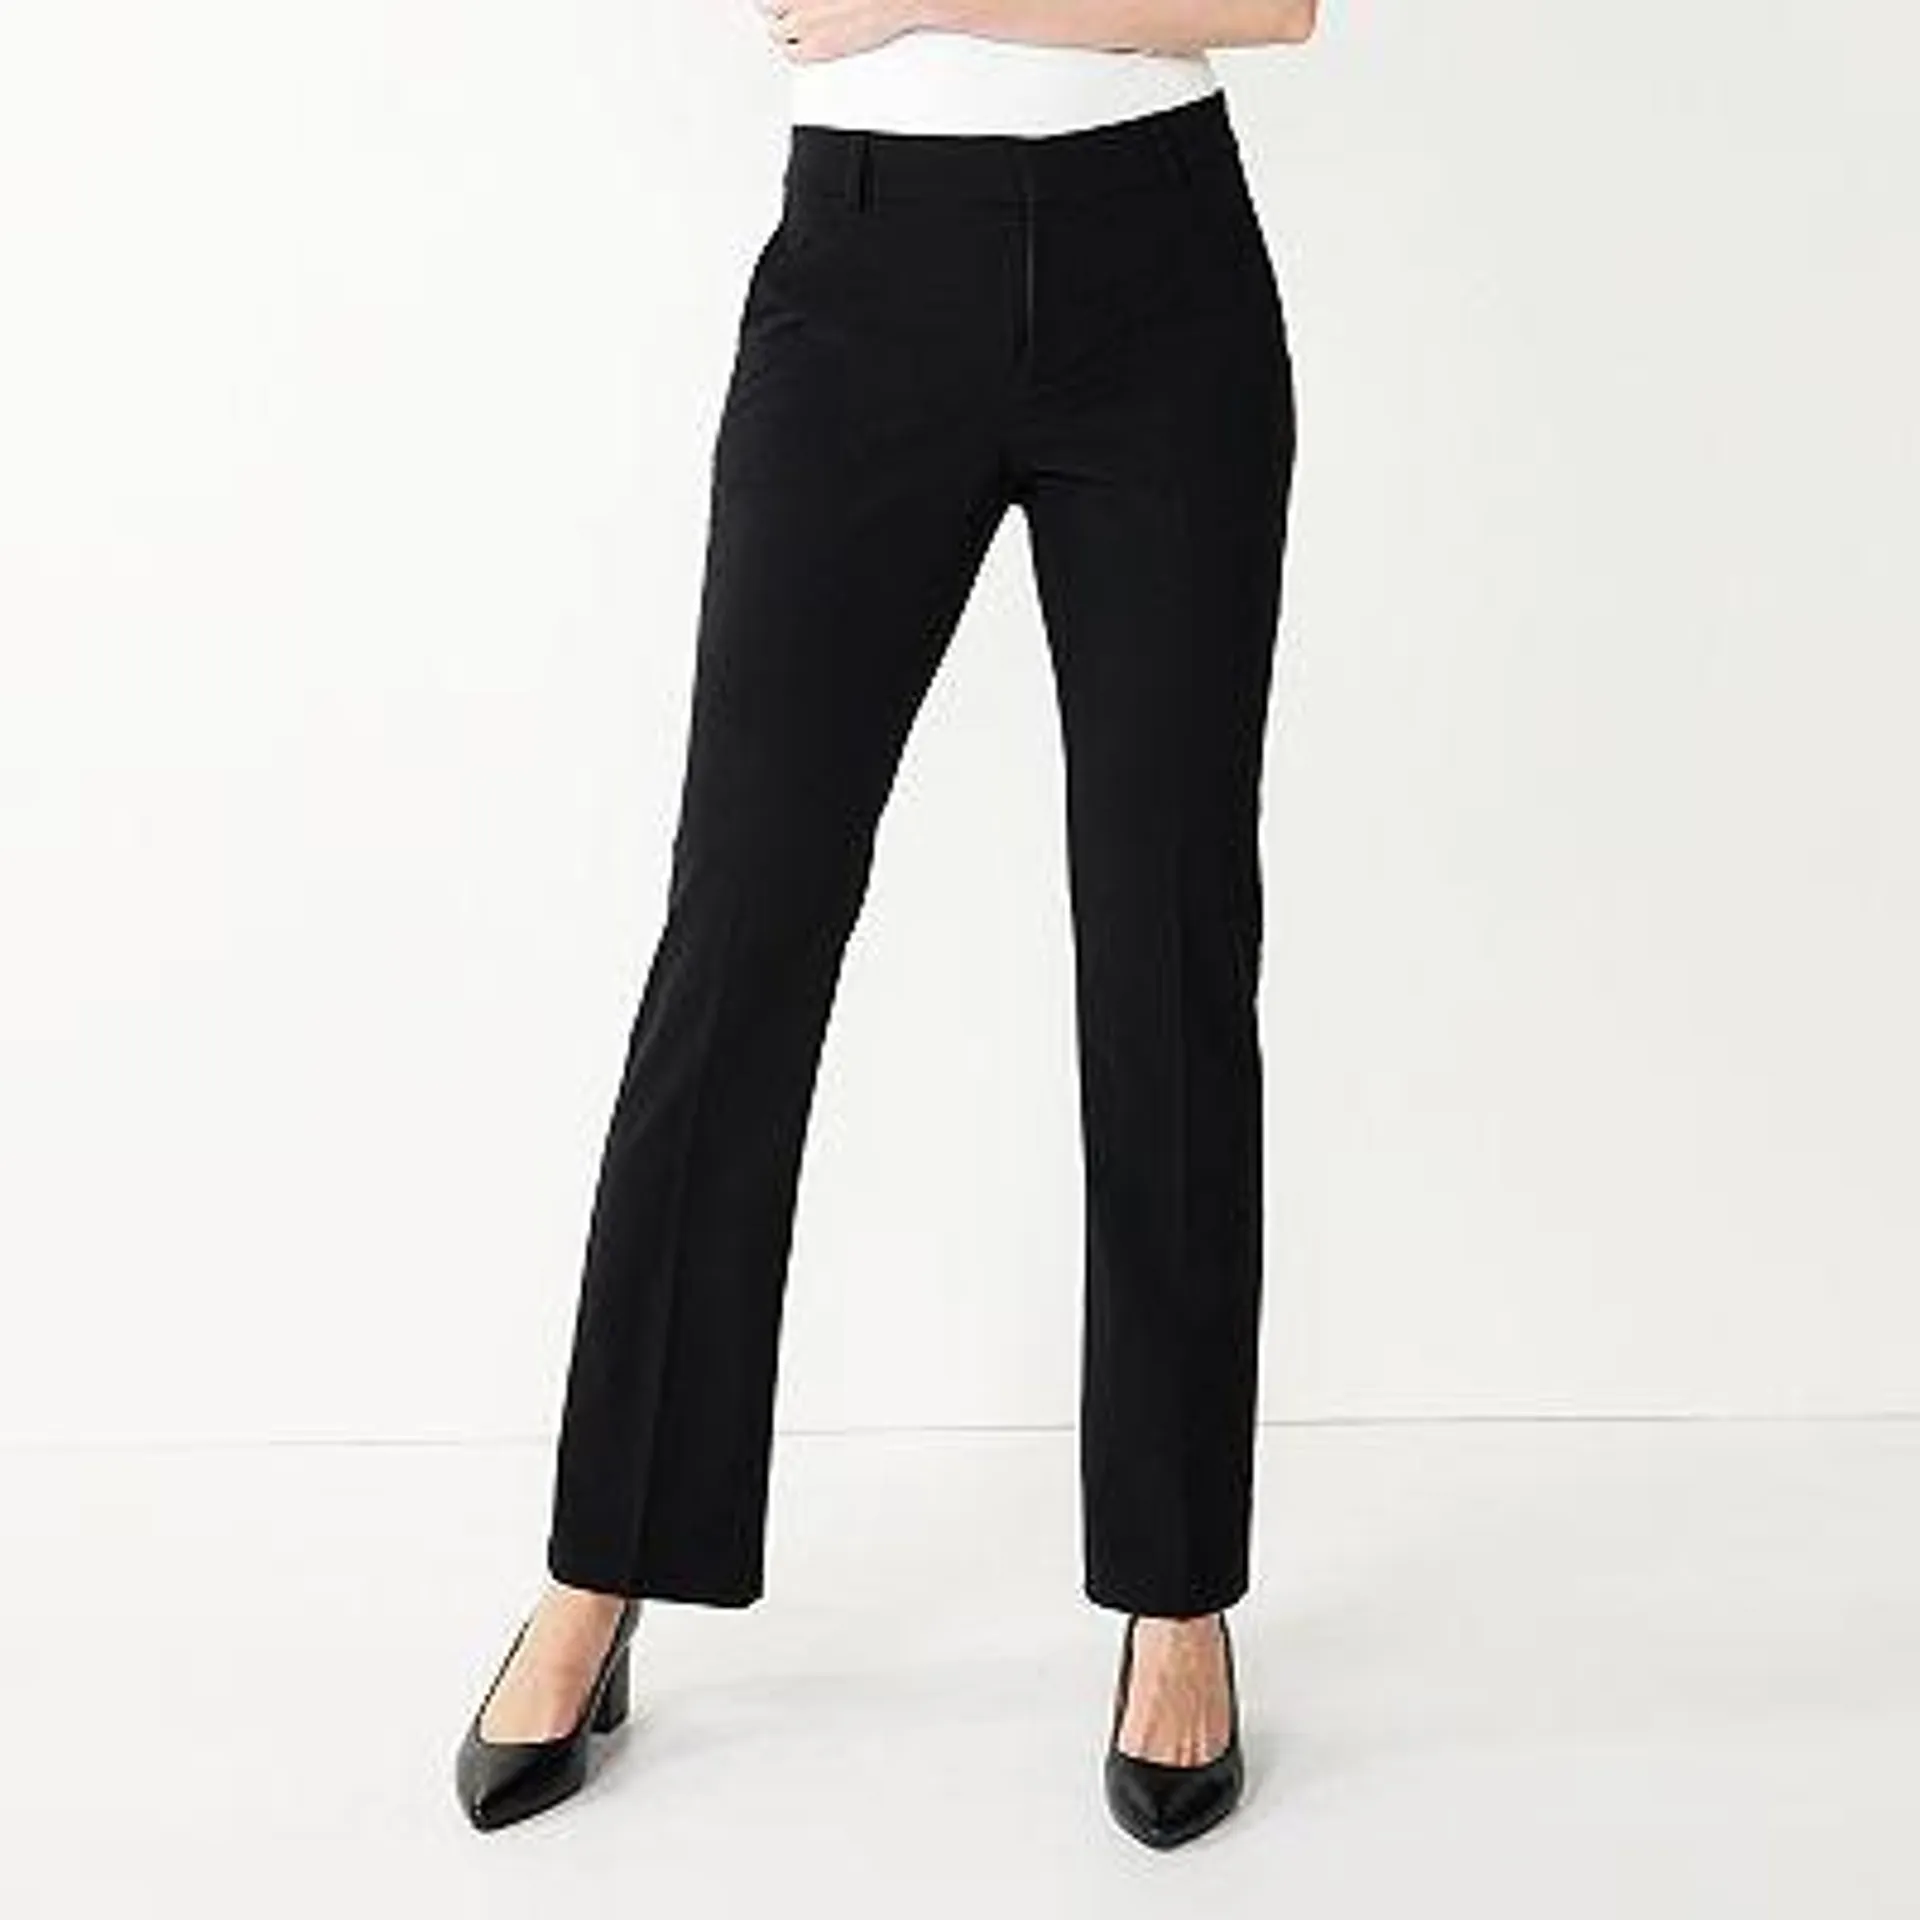 Women's Nine West Barely Bootcut Pant